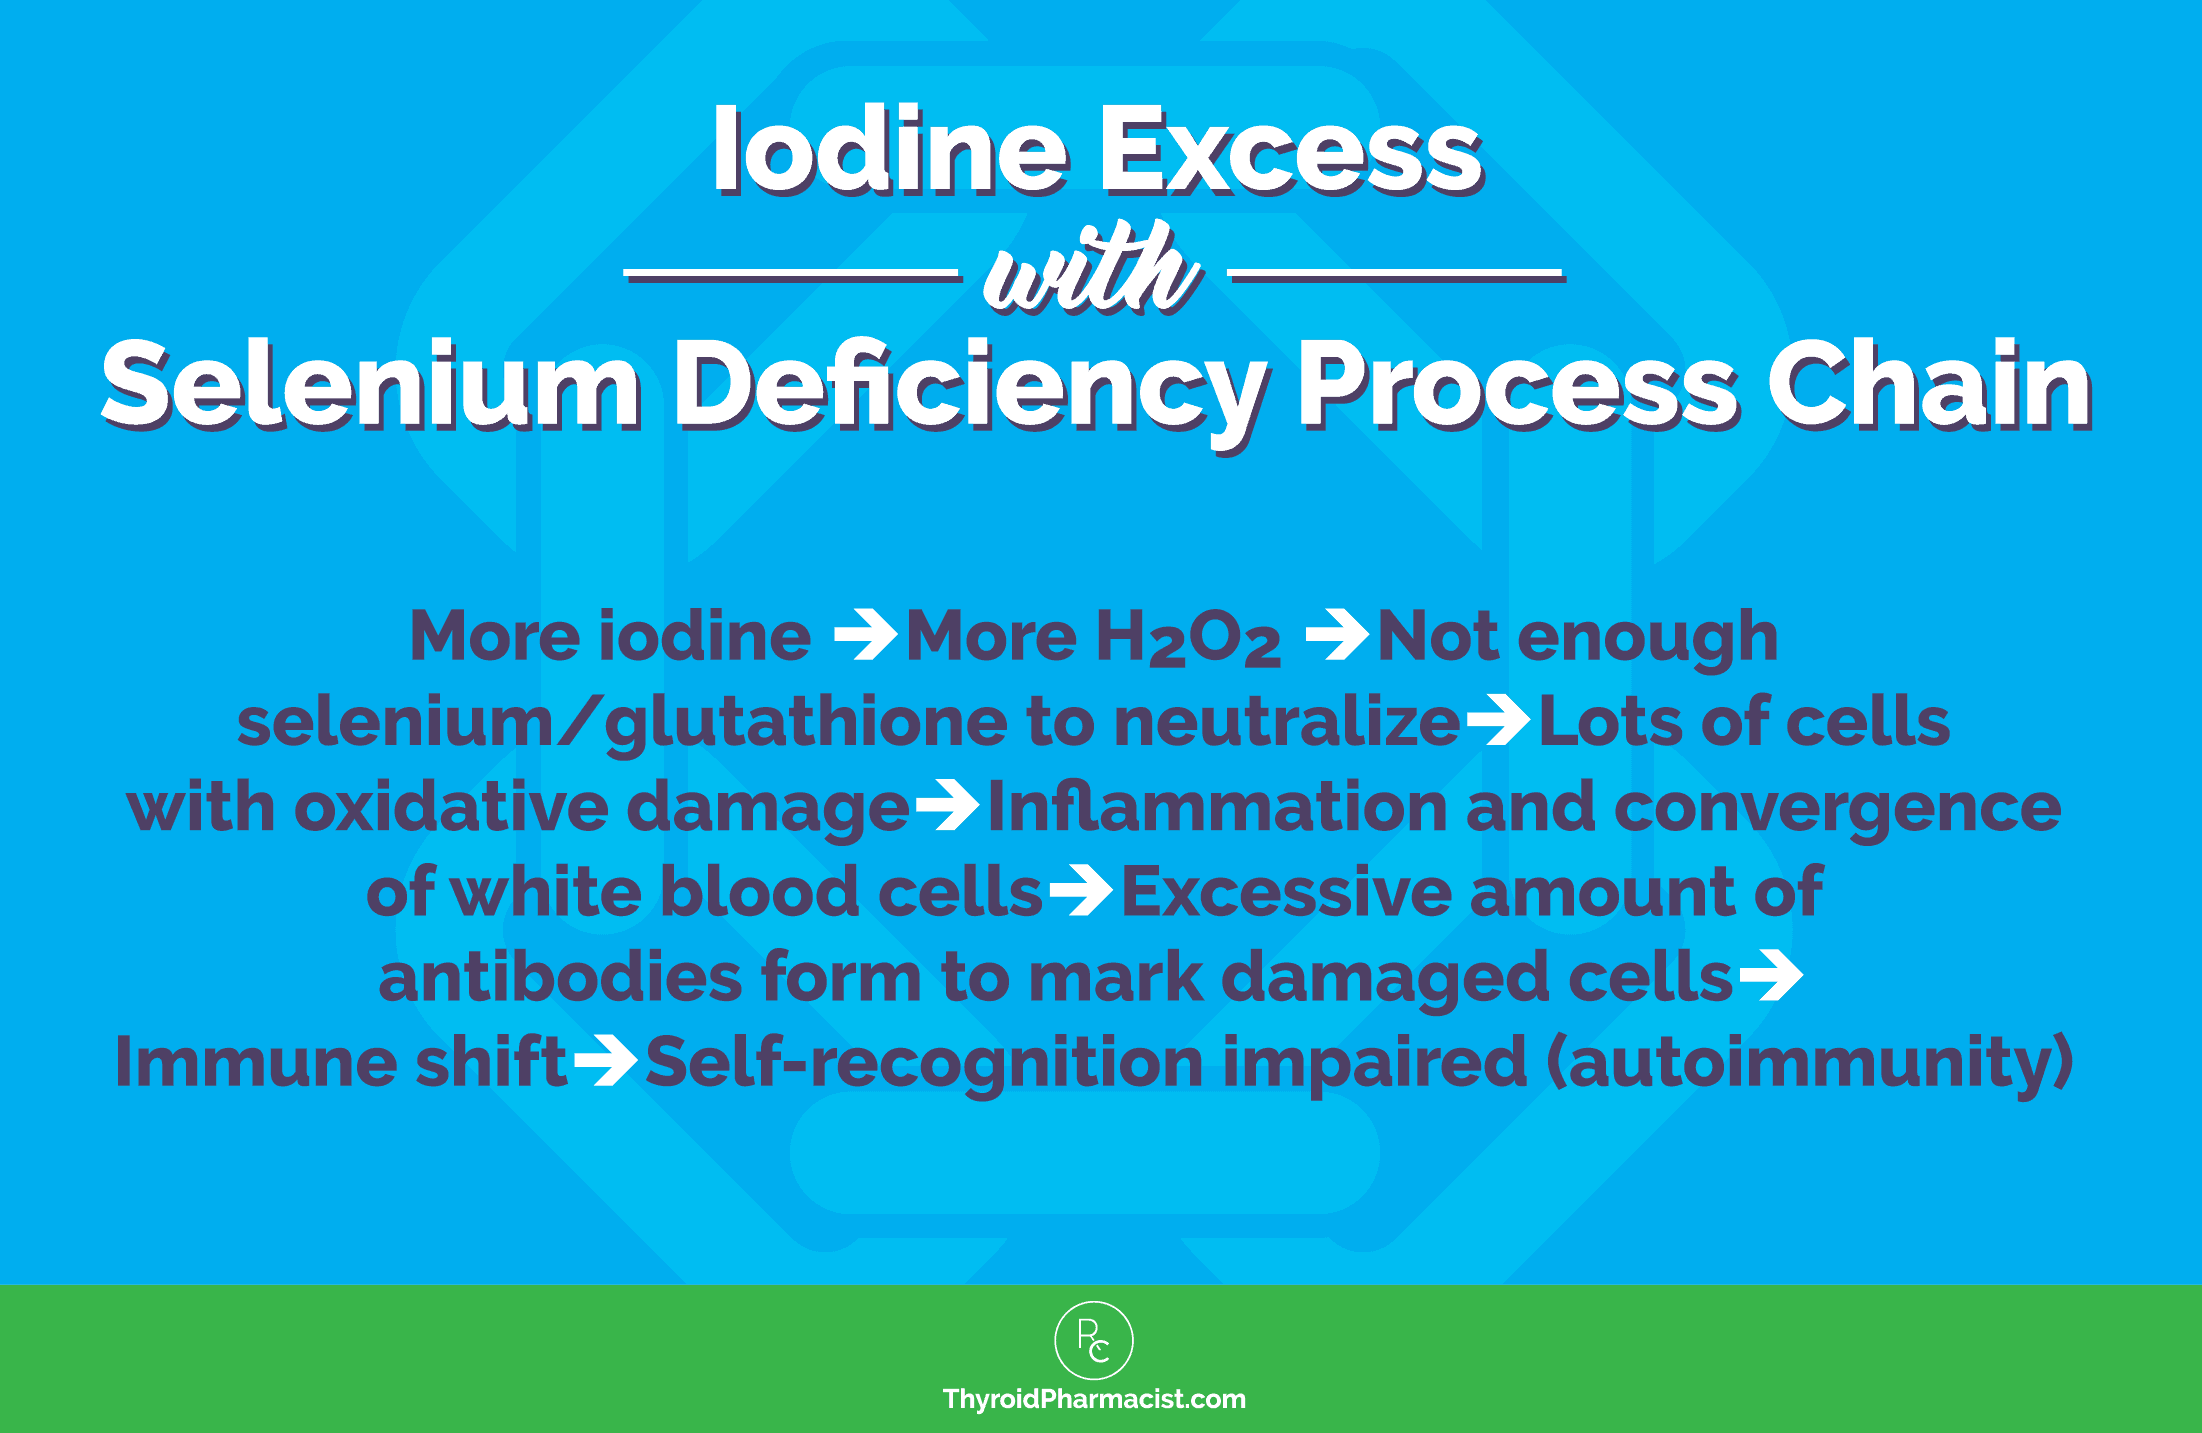 Iodine Levels In Food Chart